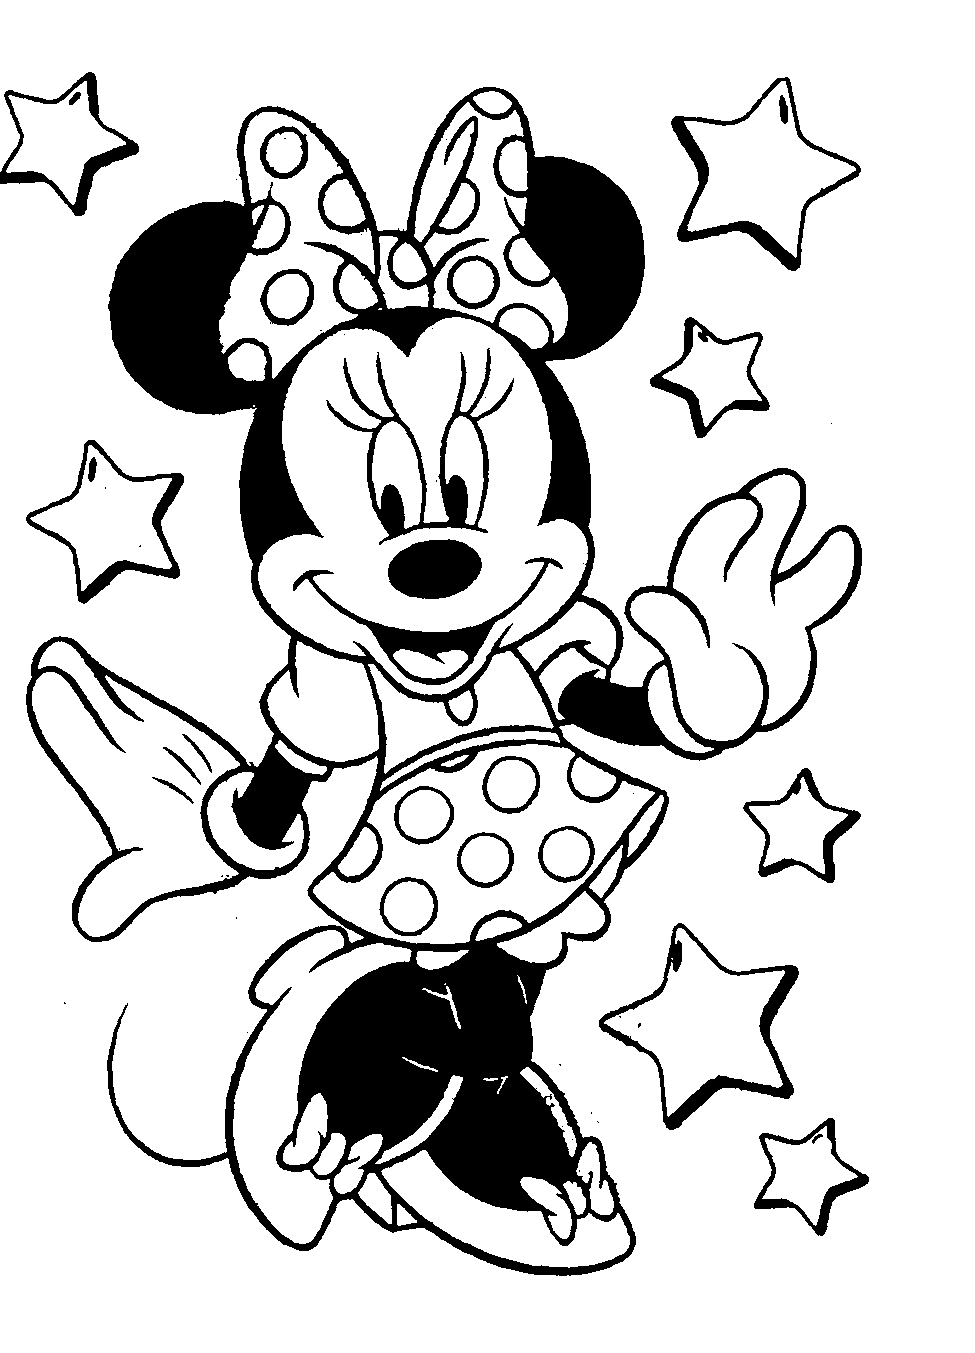 disney character coloring pages disney coloring pages coloring kids disney character coloring pages 